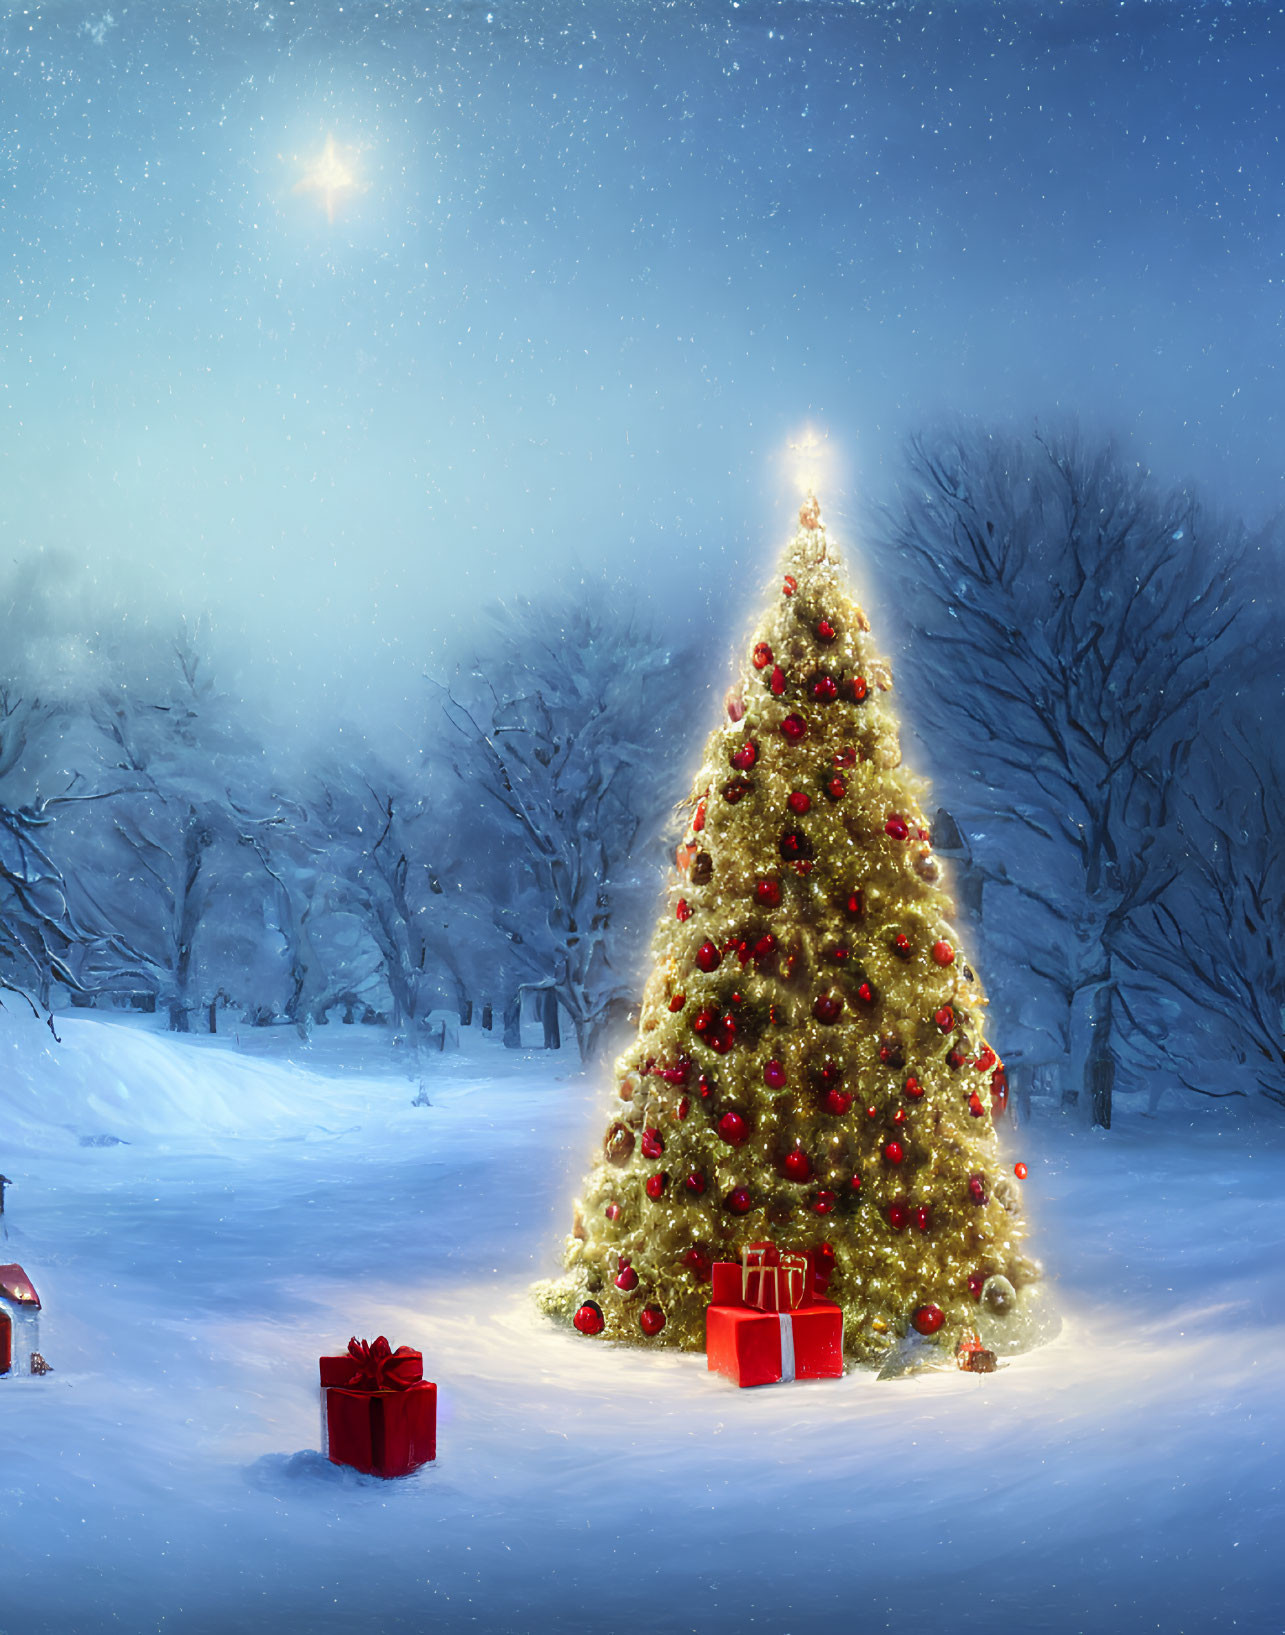 Festive Christmas tree with red ornaments and star in snowy night scene